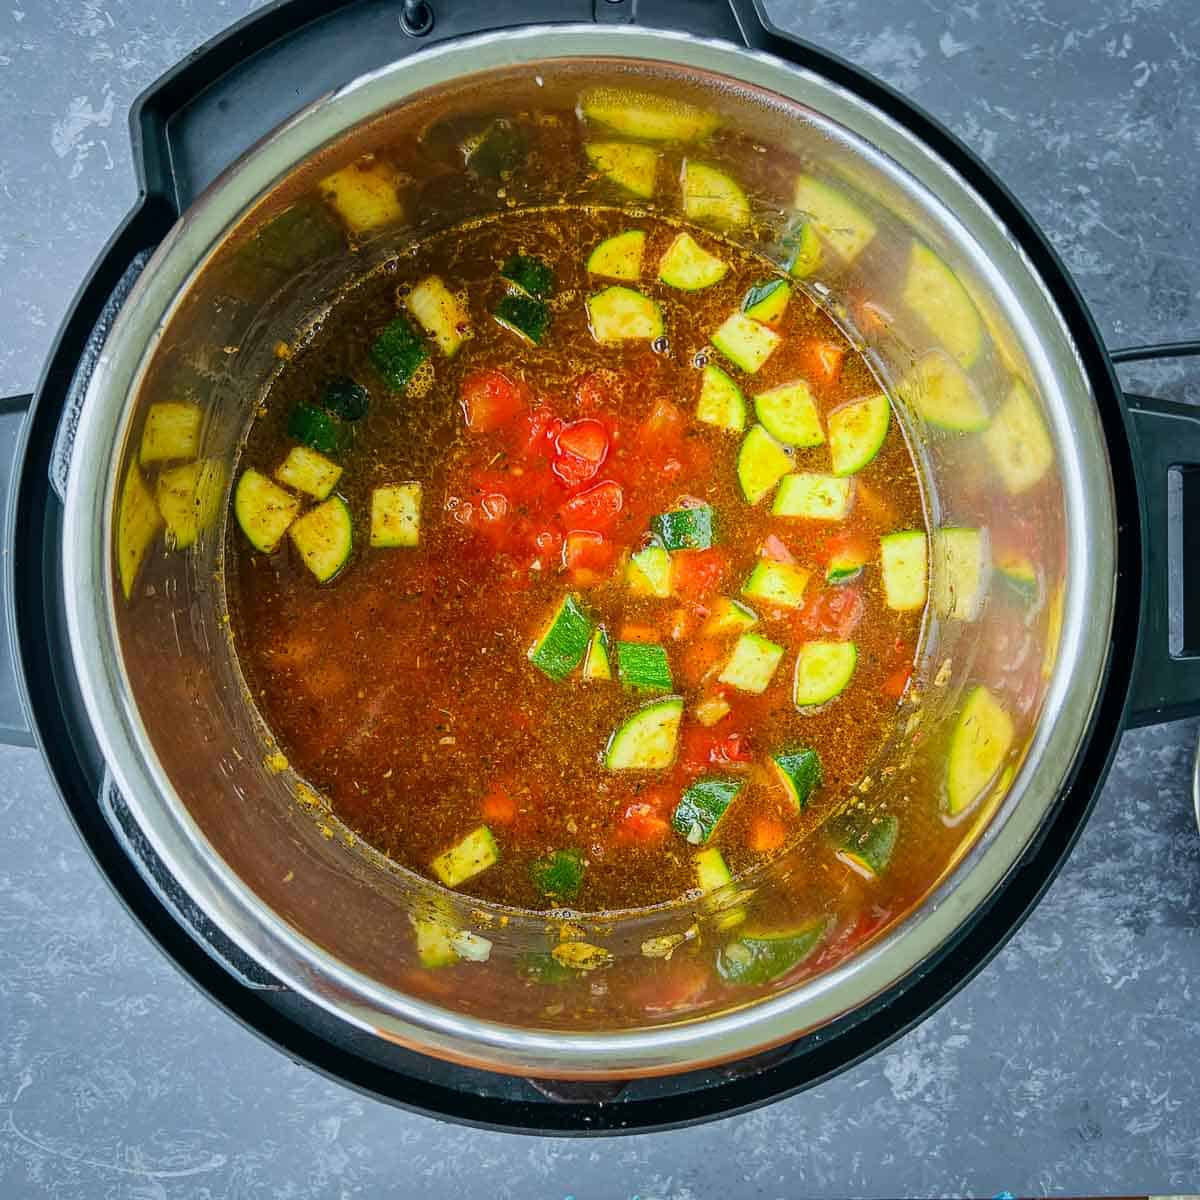 Stock added in Instant Pot.